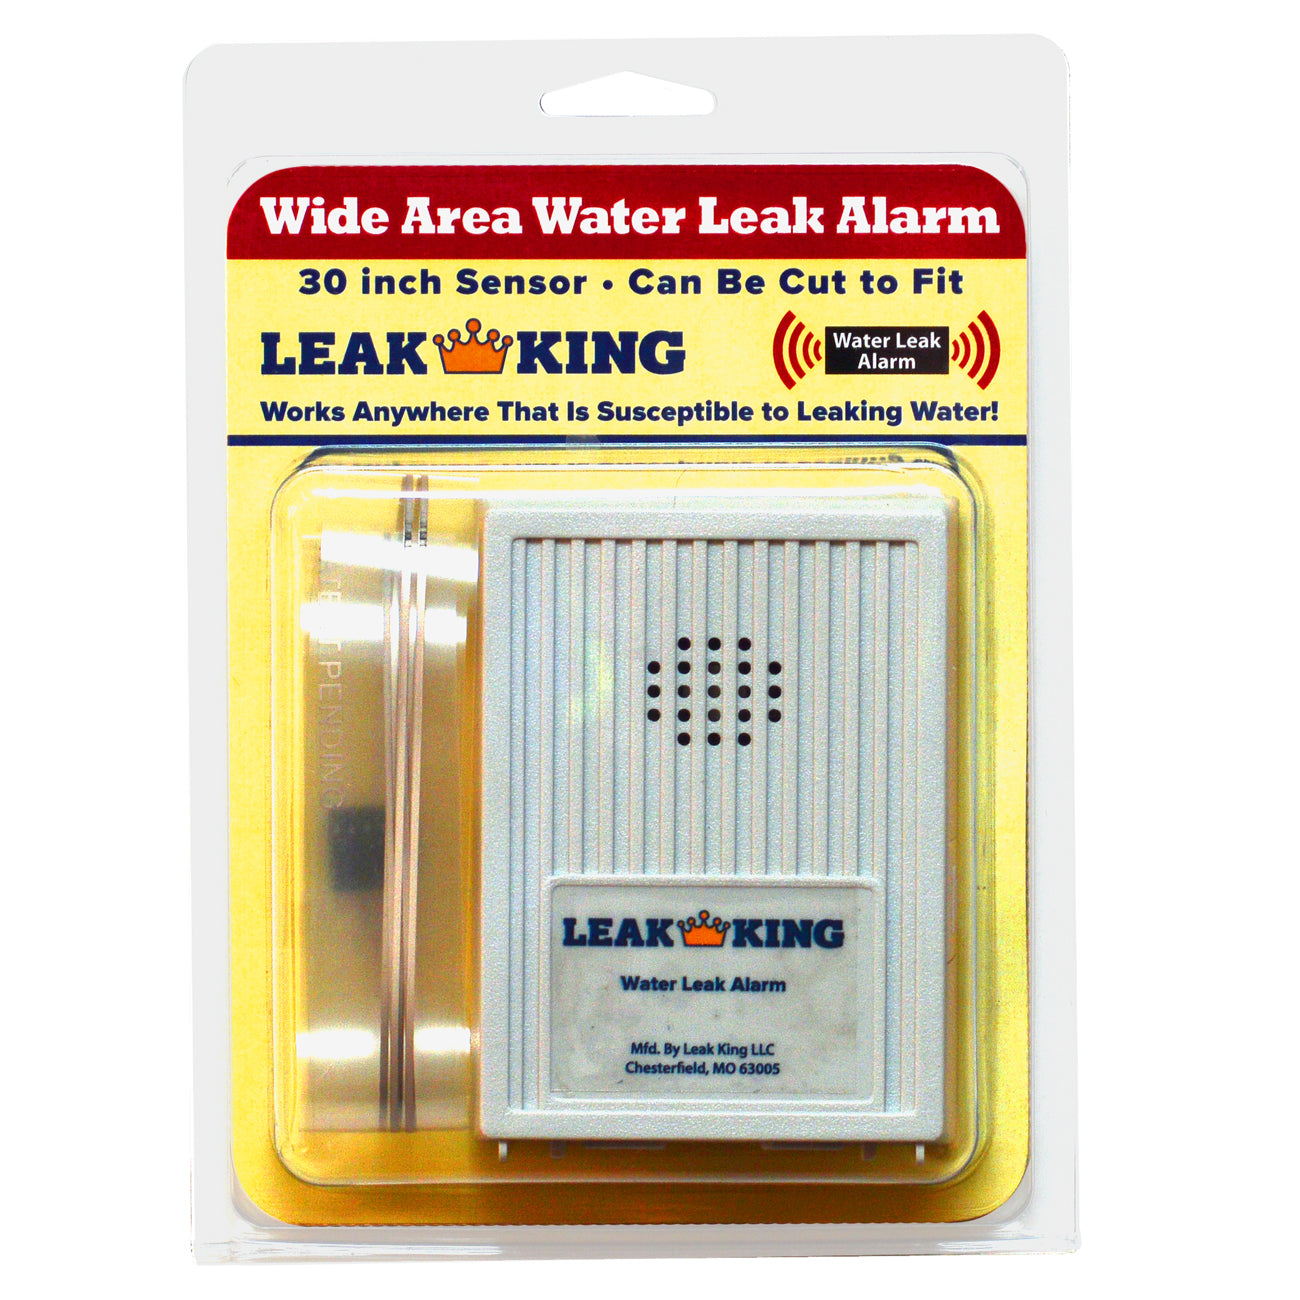 The Wide Area Leak Alarm provides a warning system for water leaks that can cause water damage in out of sight places or in remote places in your home.